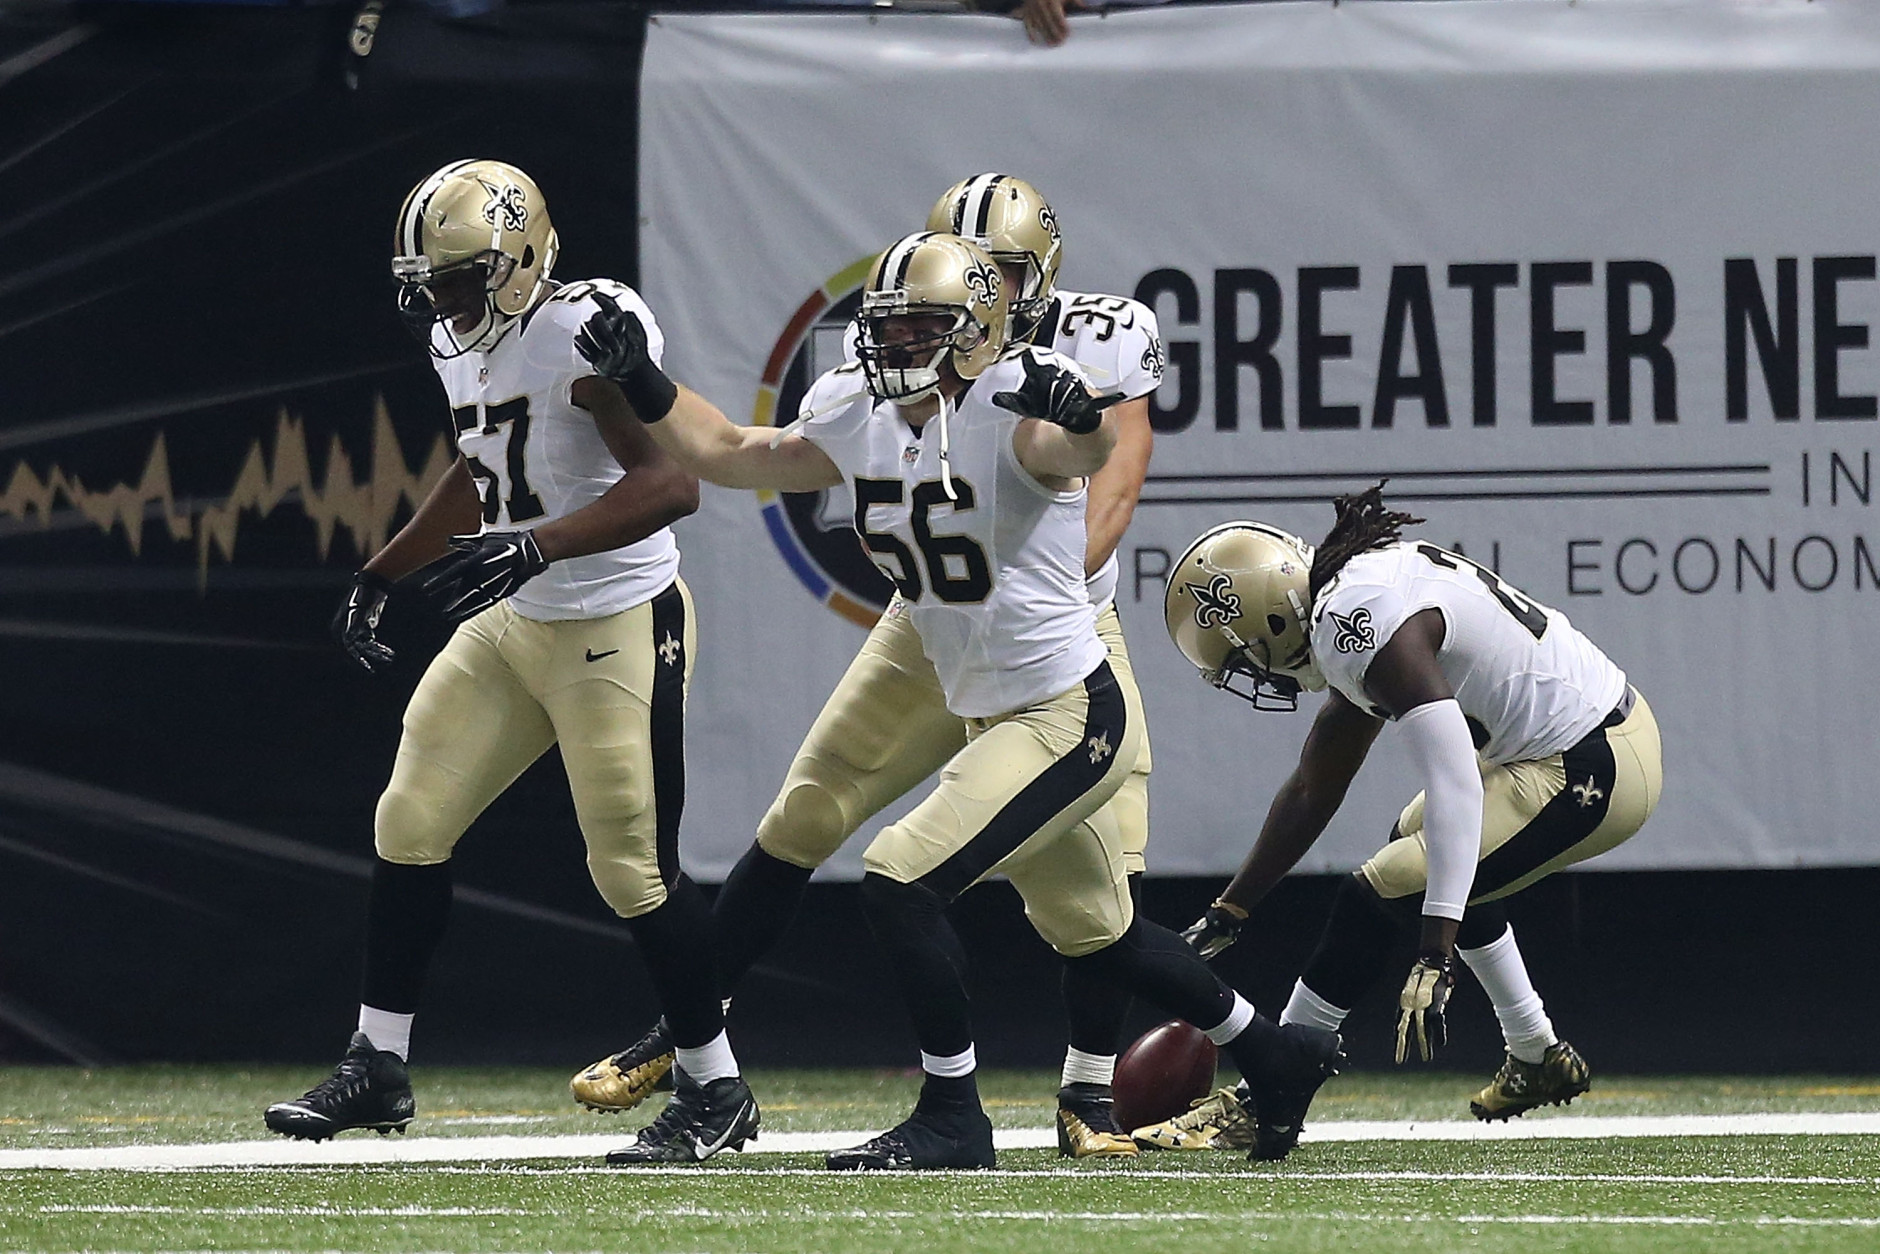 NEW ORLEANS, LA - OCTOBER 15:  Michael Mauti #56 of the New Orleans Saints reacts to a touchdown folllowing a blocked punt during the first quarter of a game against the Atlanta Falcons at the Mercedes-Benz Superdome on October 15, 2015 in New Orleans, Louisiana.  (Photo by Sean Gardner/Getty Images)